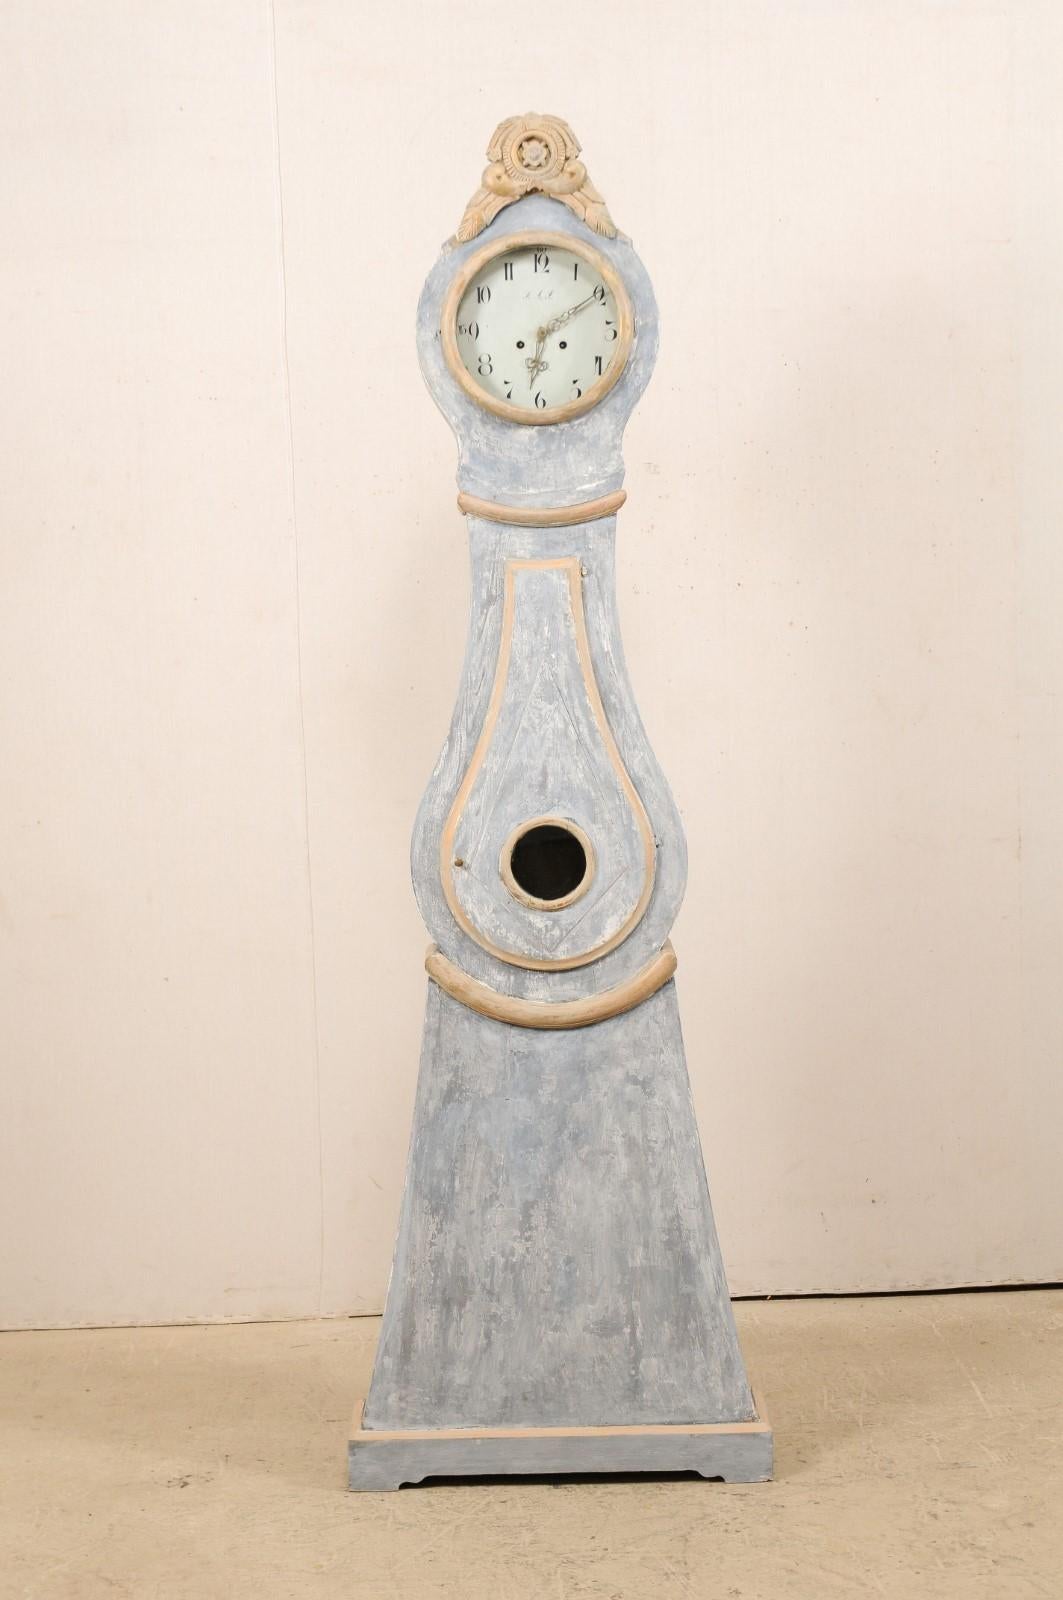 An early 19th century Northern Swedish painted wood grandfather clock with nice trimmings. This antique floor clock from Norrbotten County, Sweden (Northern region) features a nicely carved, exaggerated and raised top crest adorn with petite flower